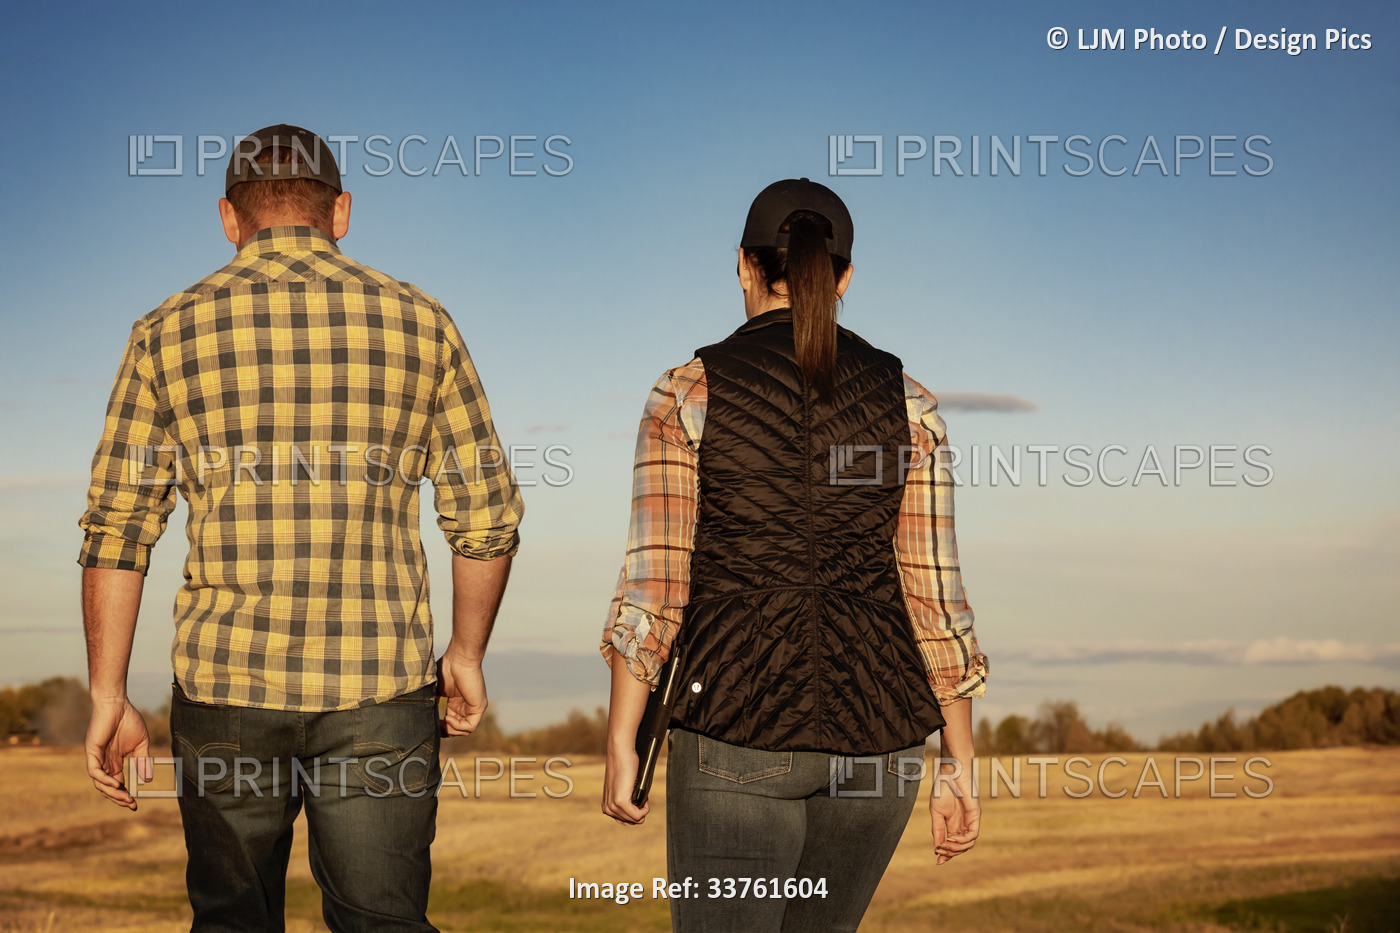 A view from behind of a husband and wife walking in a harvested field, spending ...